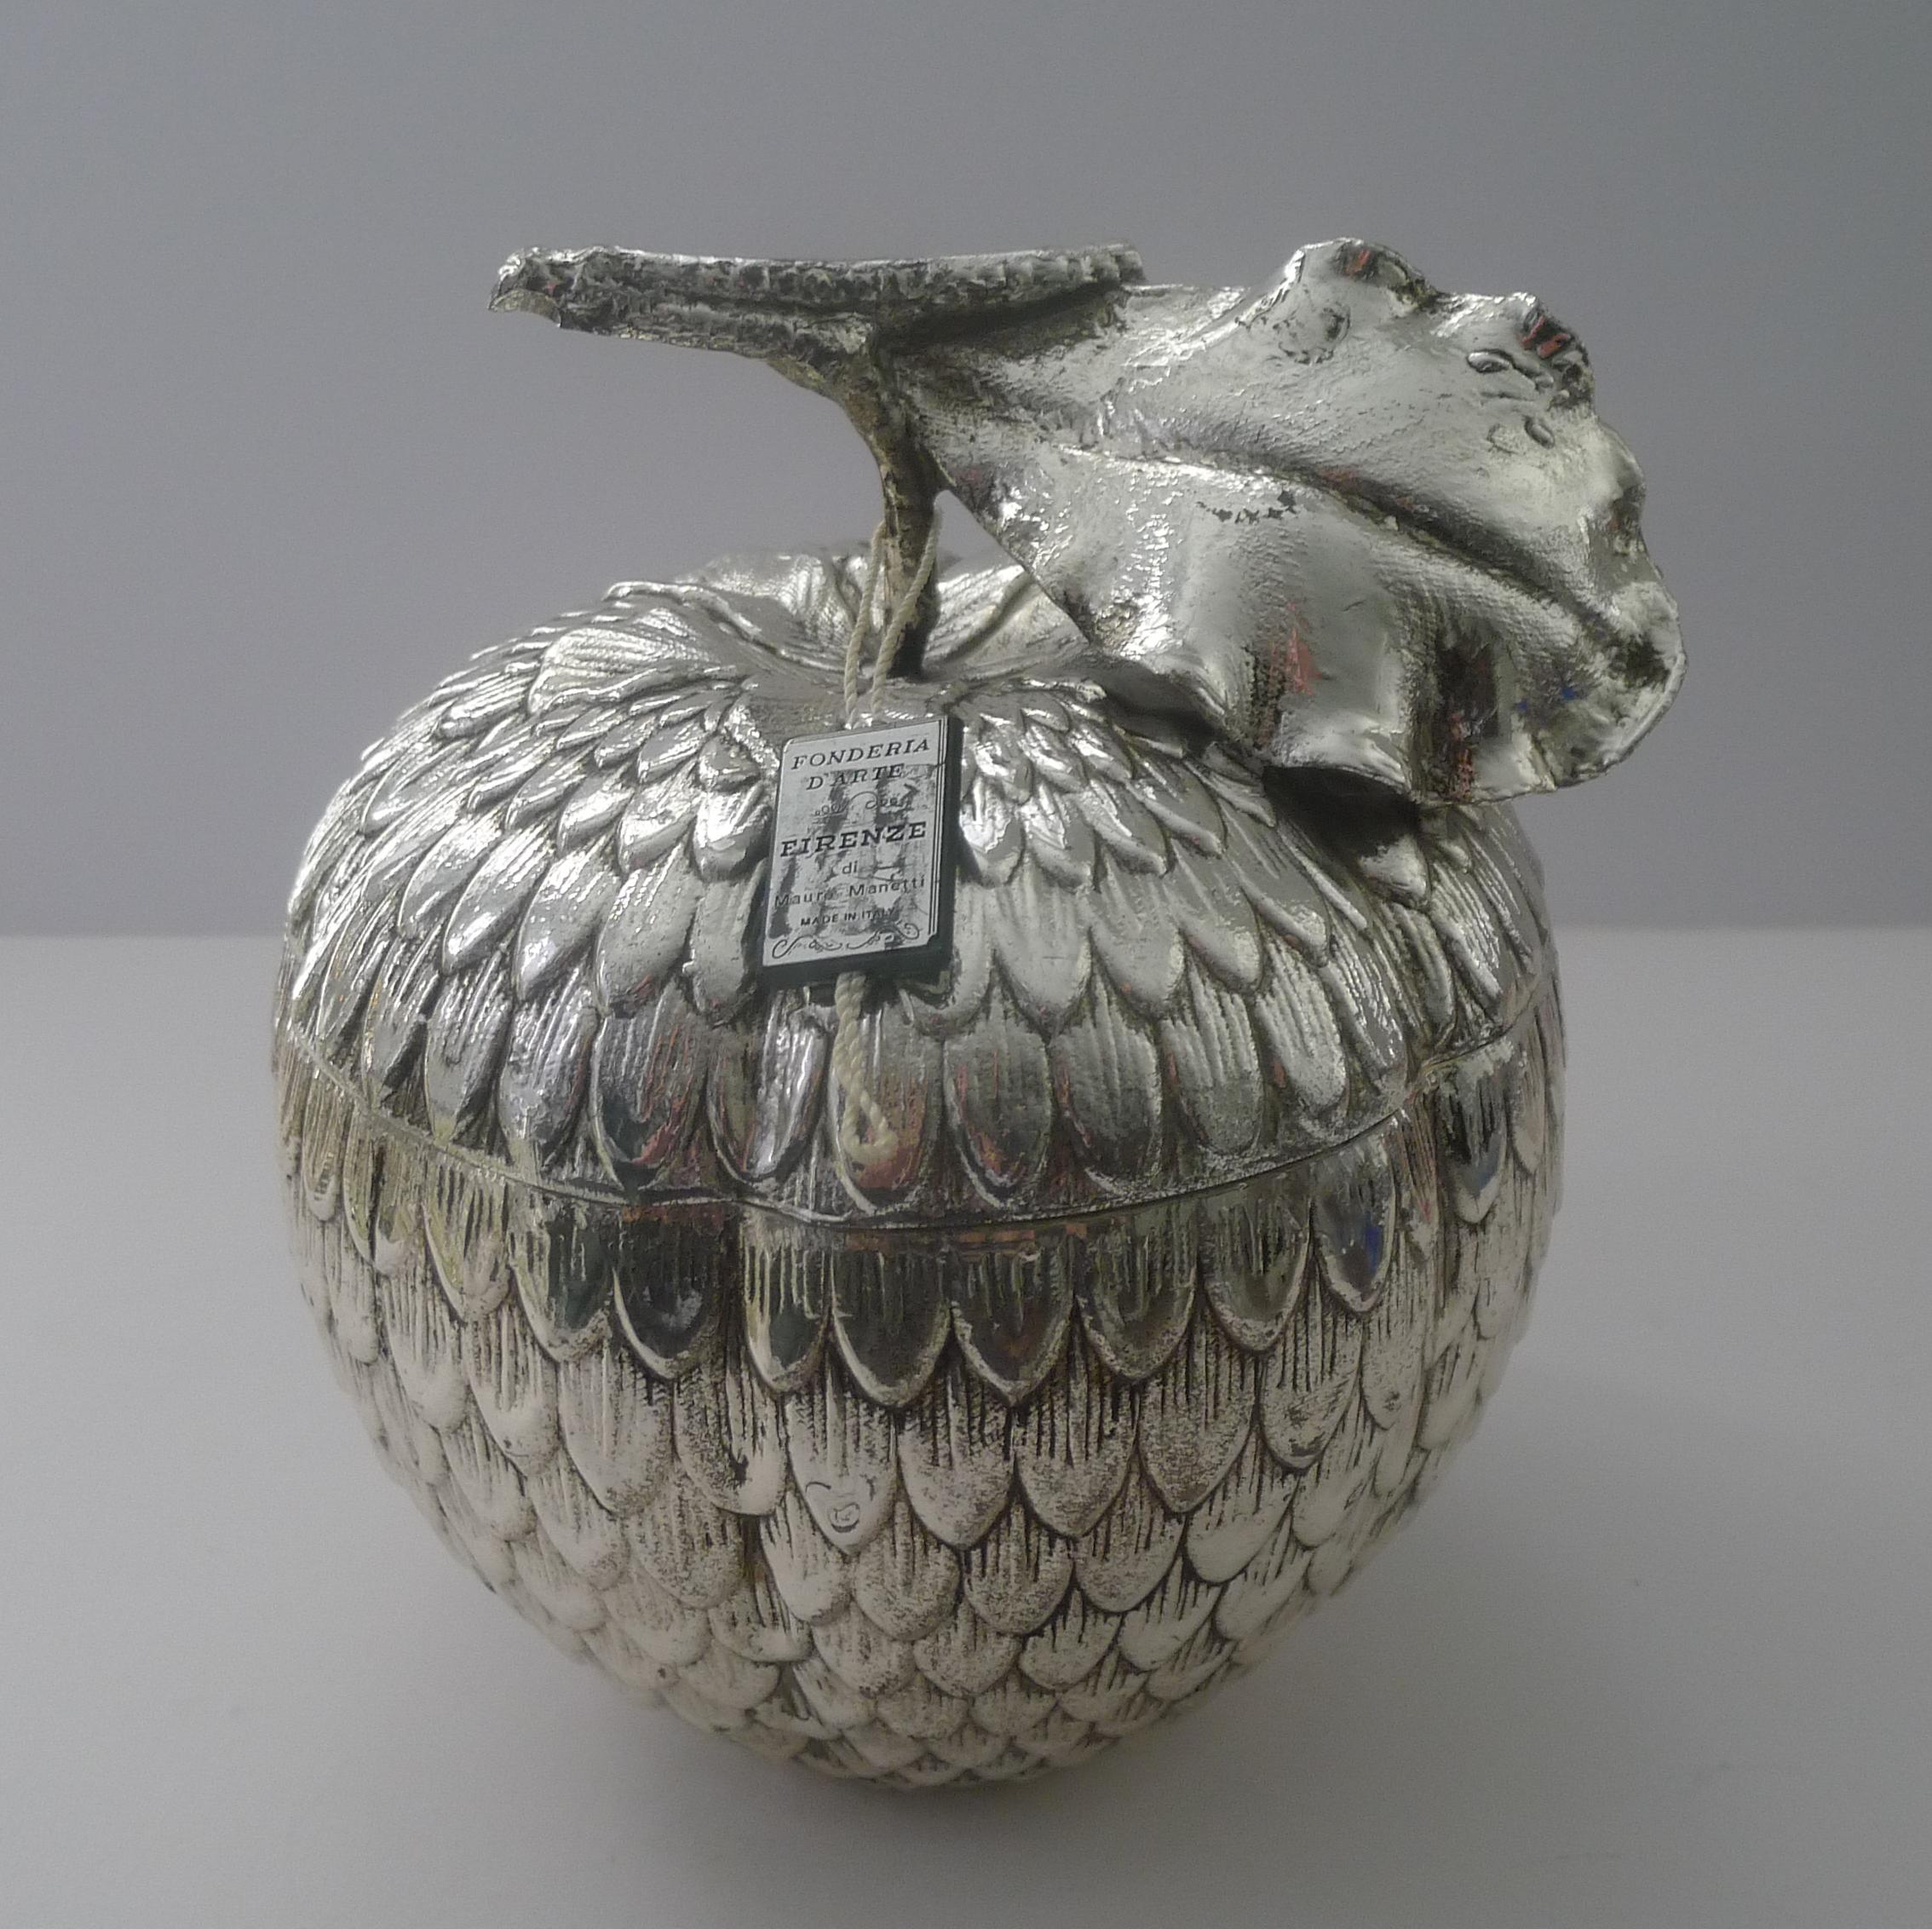 A rare example of a Mauro Maetti designed ice bucket in the form of an apple, one of the scarcer models and in almost pristine condition.

It is lucky enough to retain it's original label 